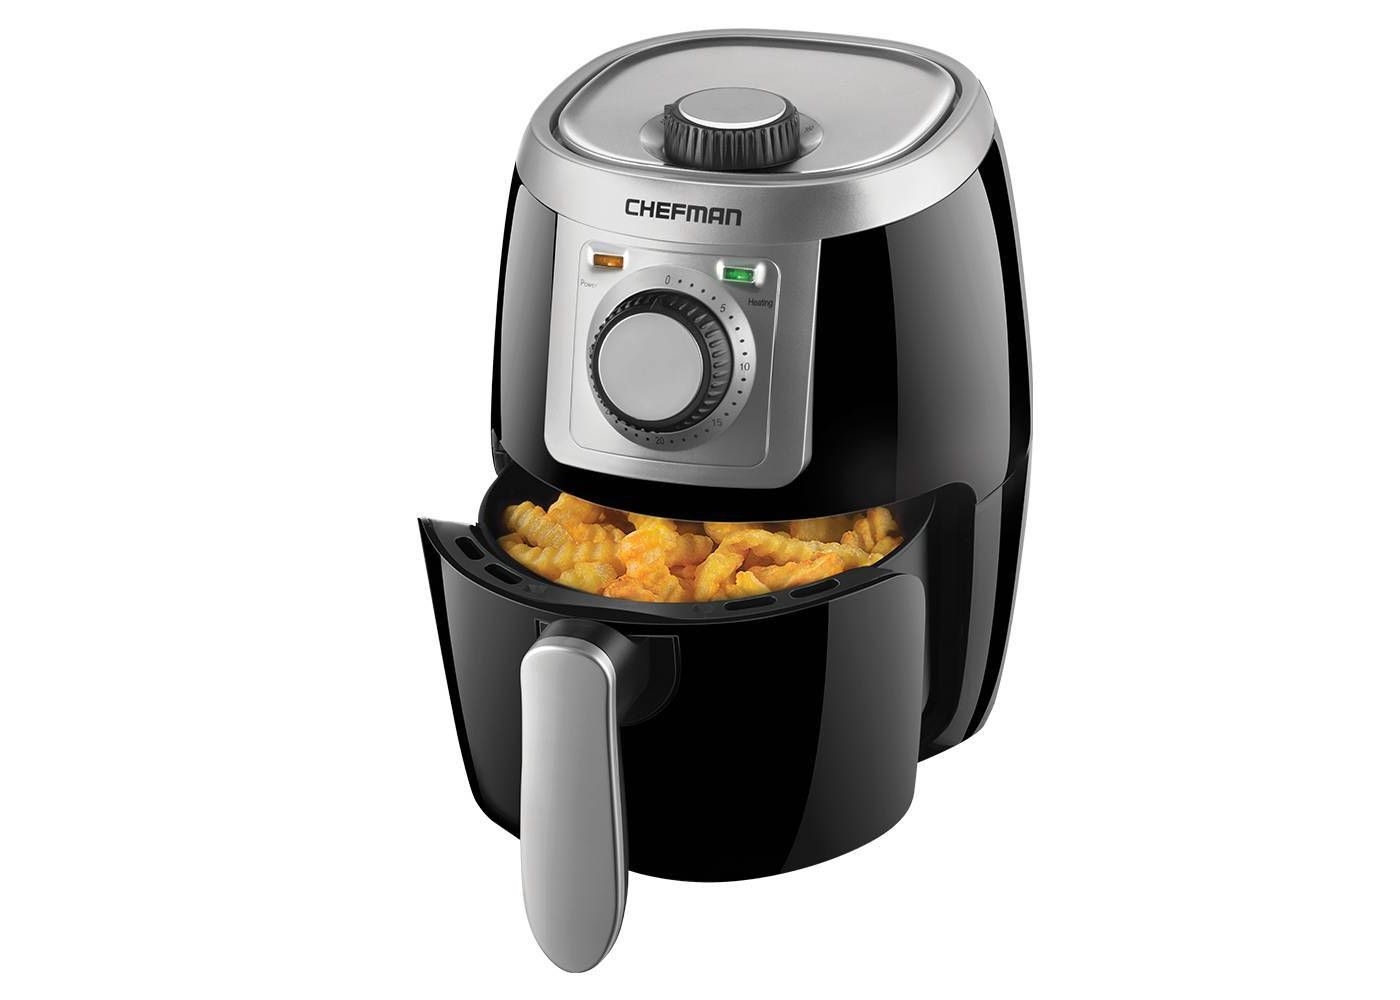 The air fryer holding French fries in its drawer